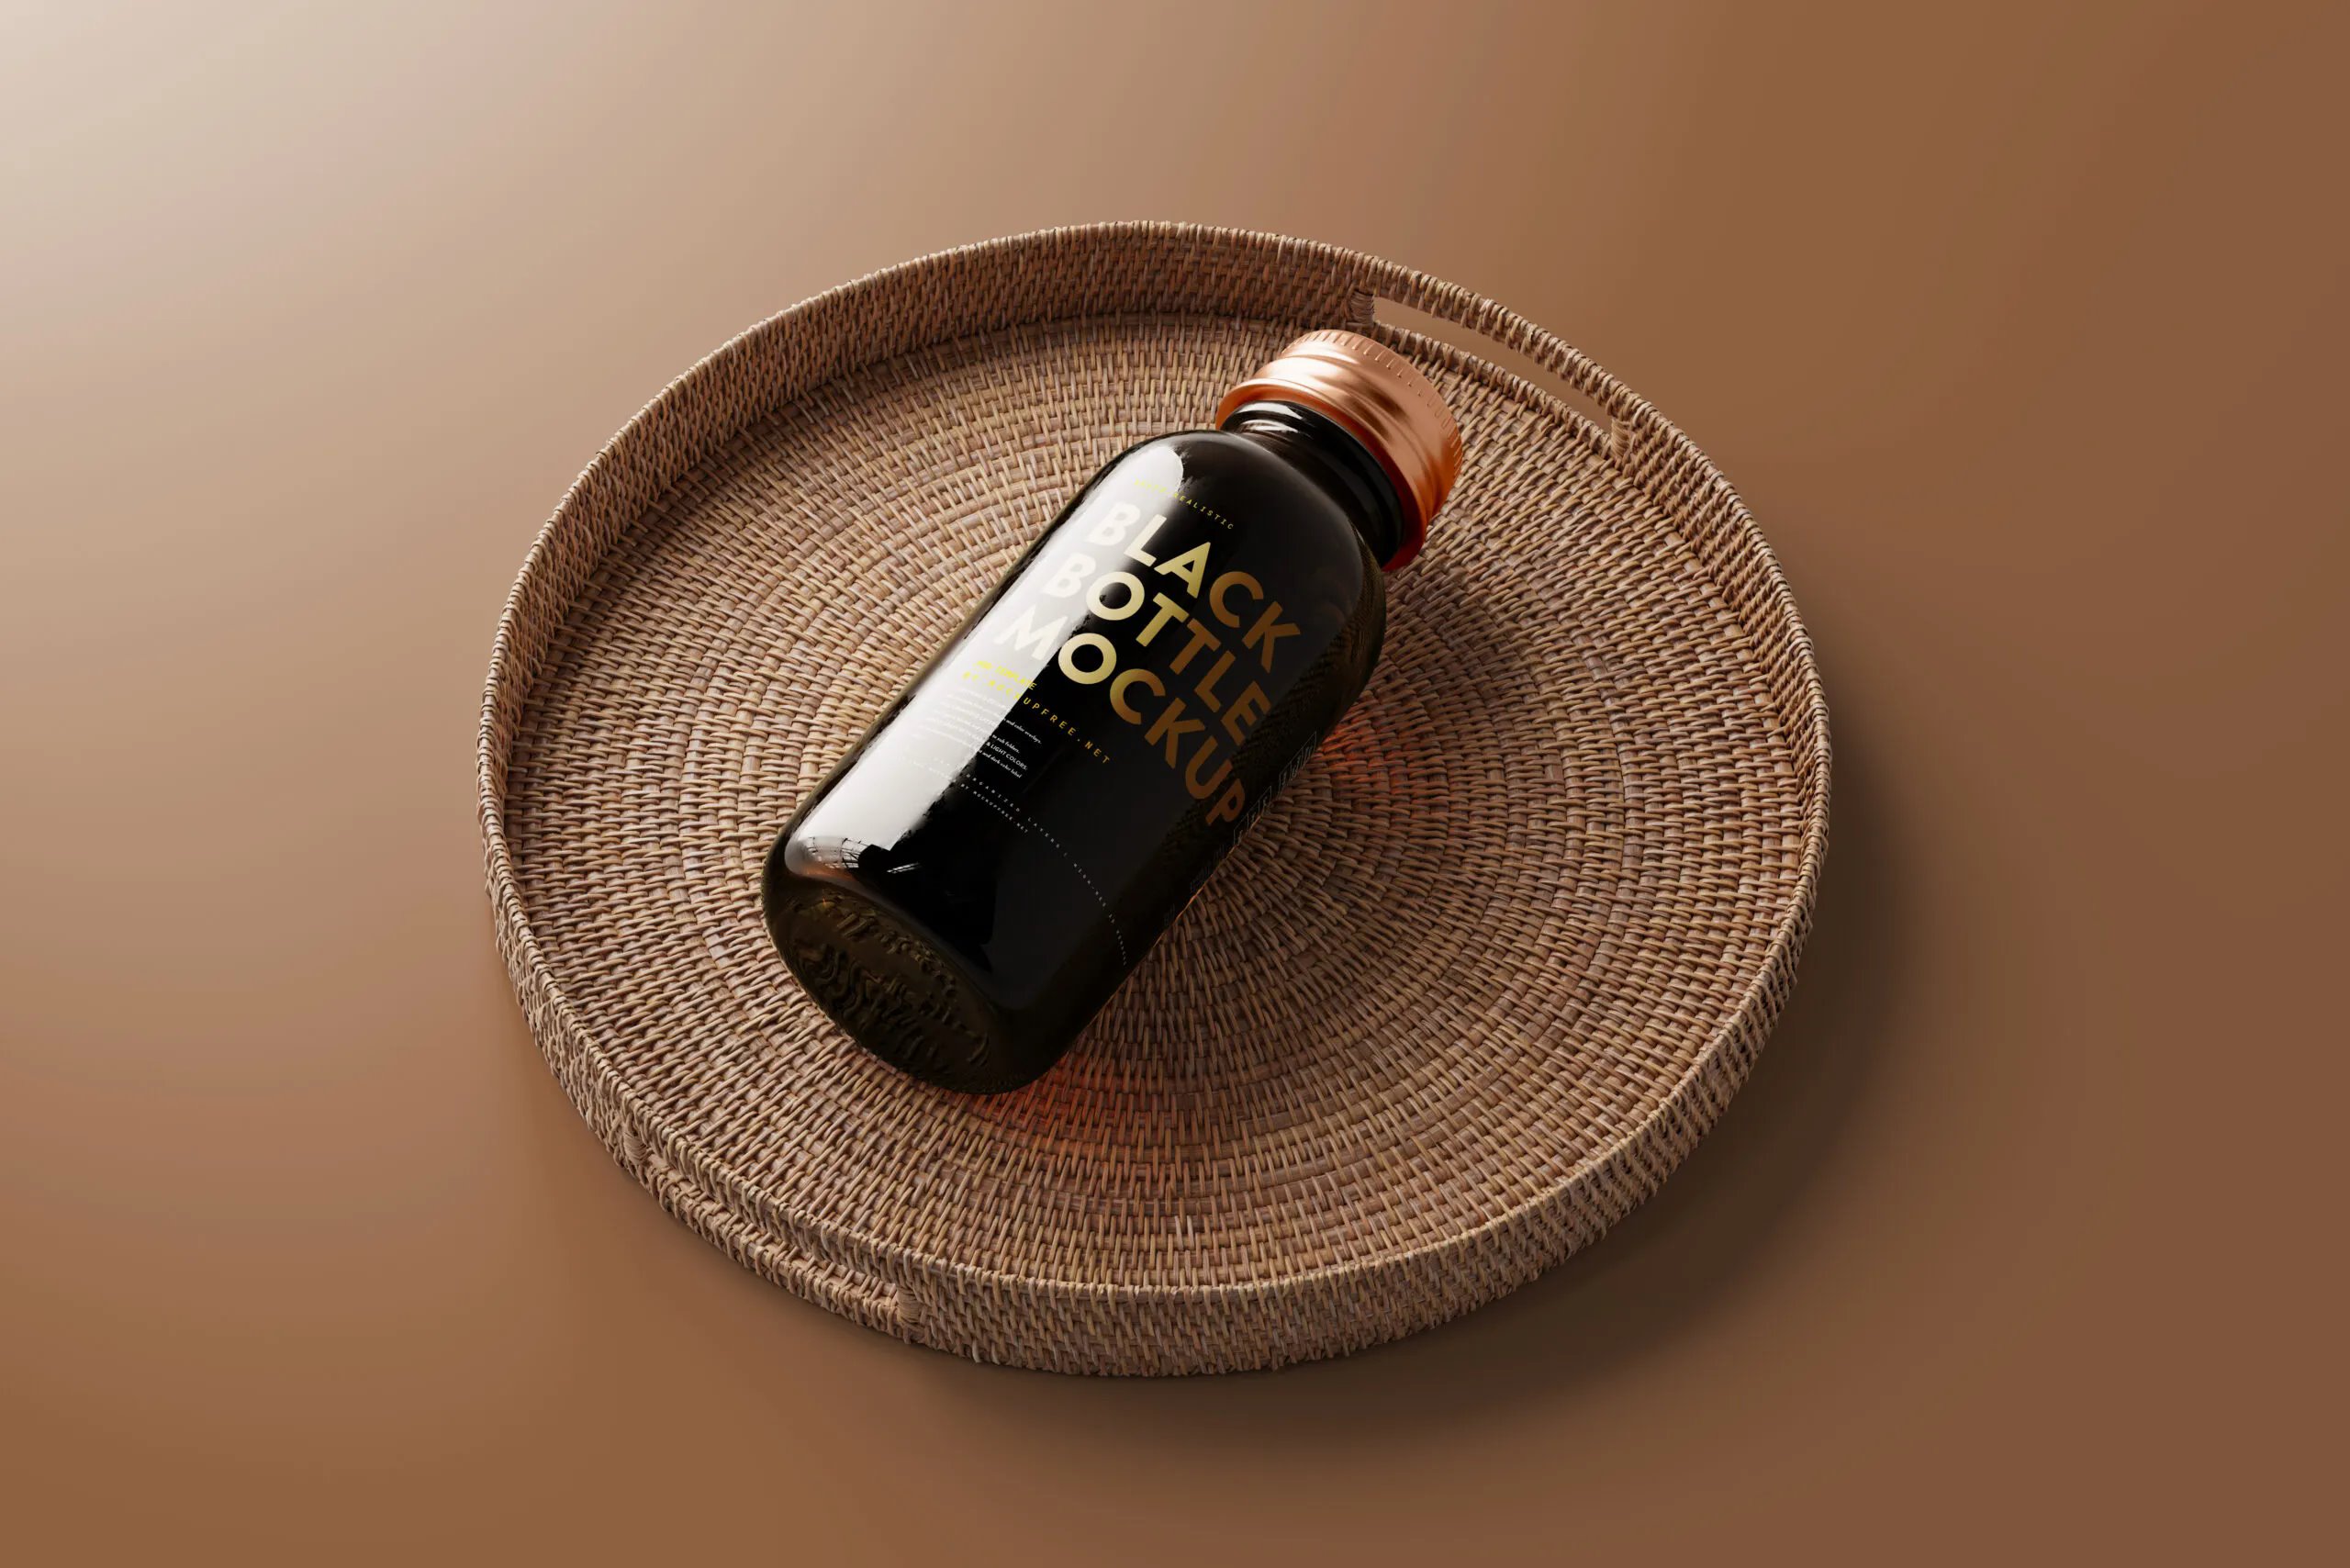 6 Small Black Glass Bottle Mockups in Varied Visions FREE PSD